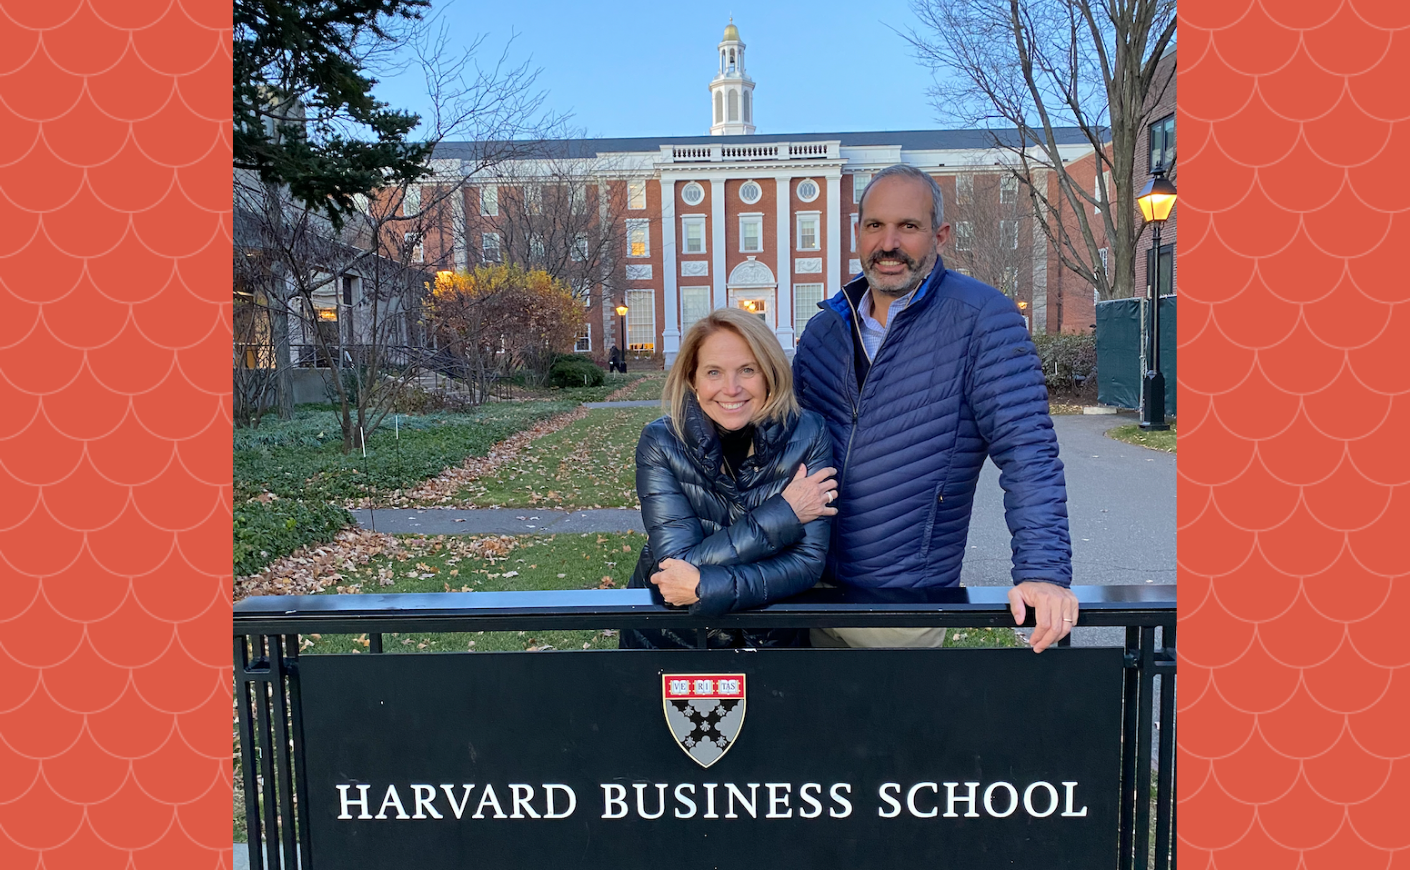 Katie Couric and John Molner at Harvard Business School